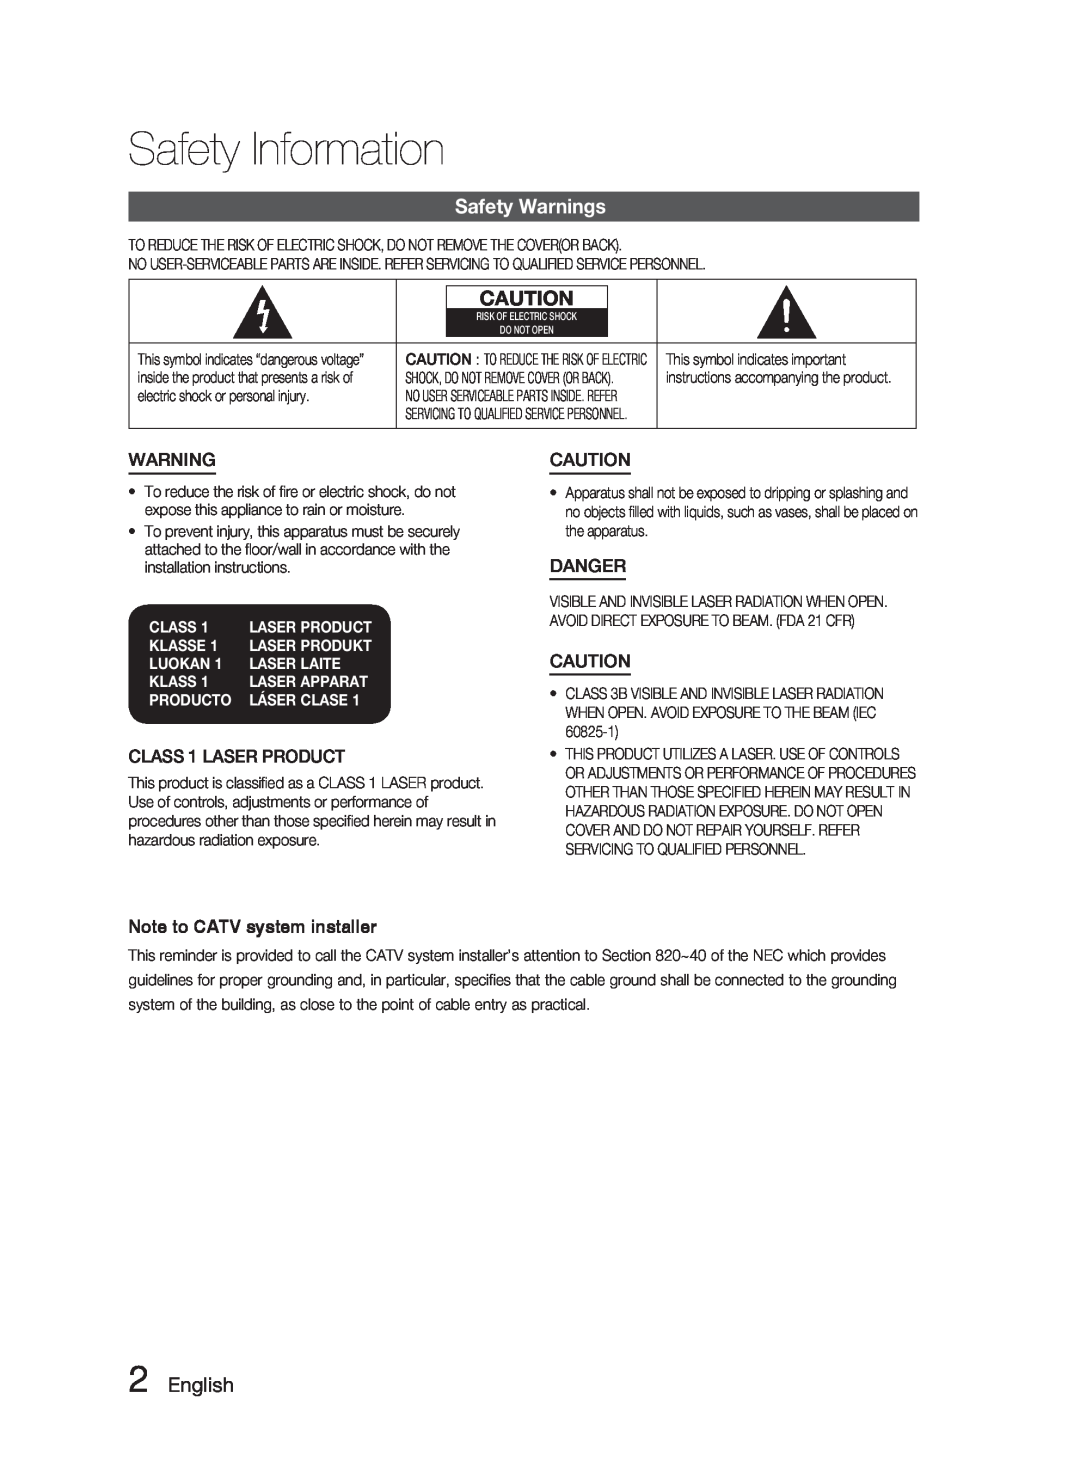 Samsung HT-C550-XAC Safety Information, Safety Warnings, English, Note to CATV system installer, Class, Klasse, Luokan 